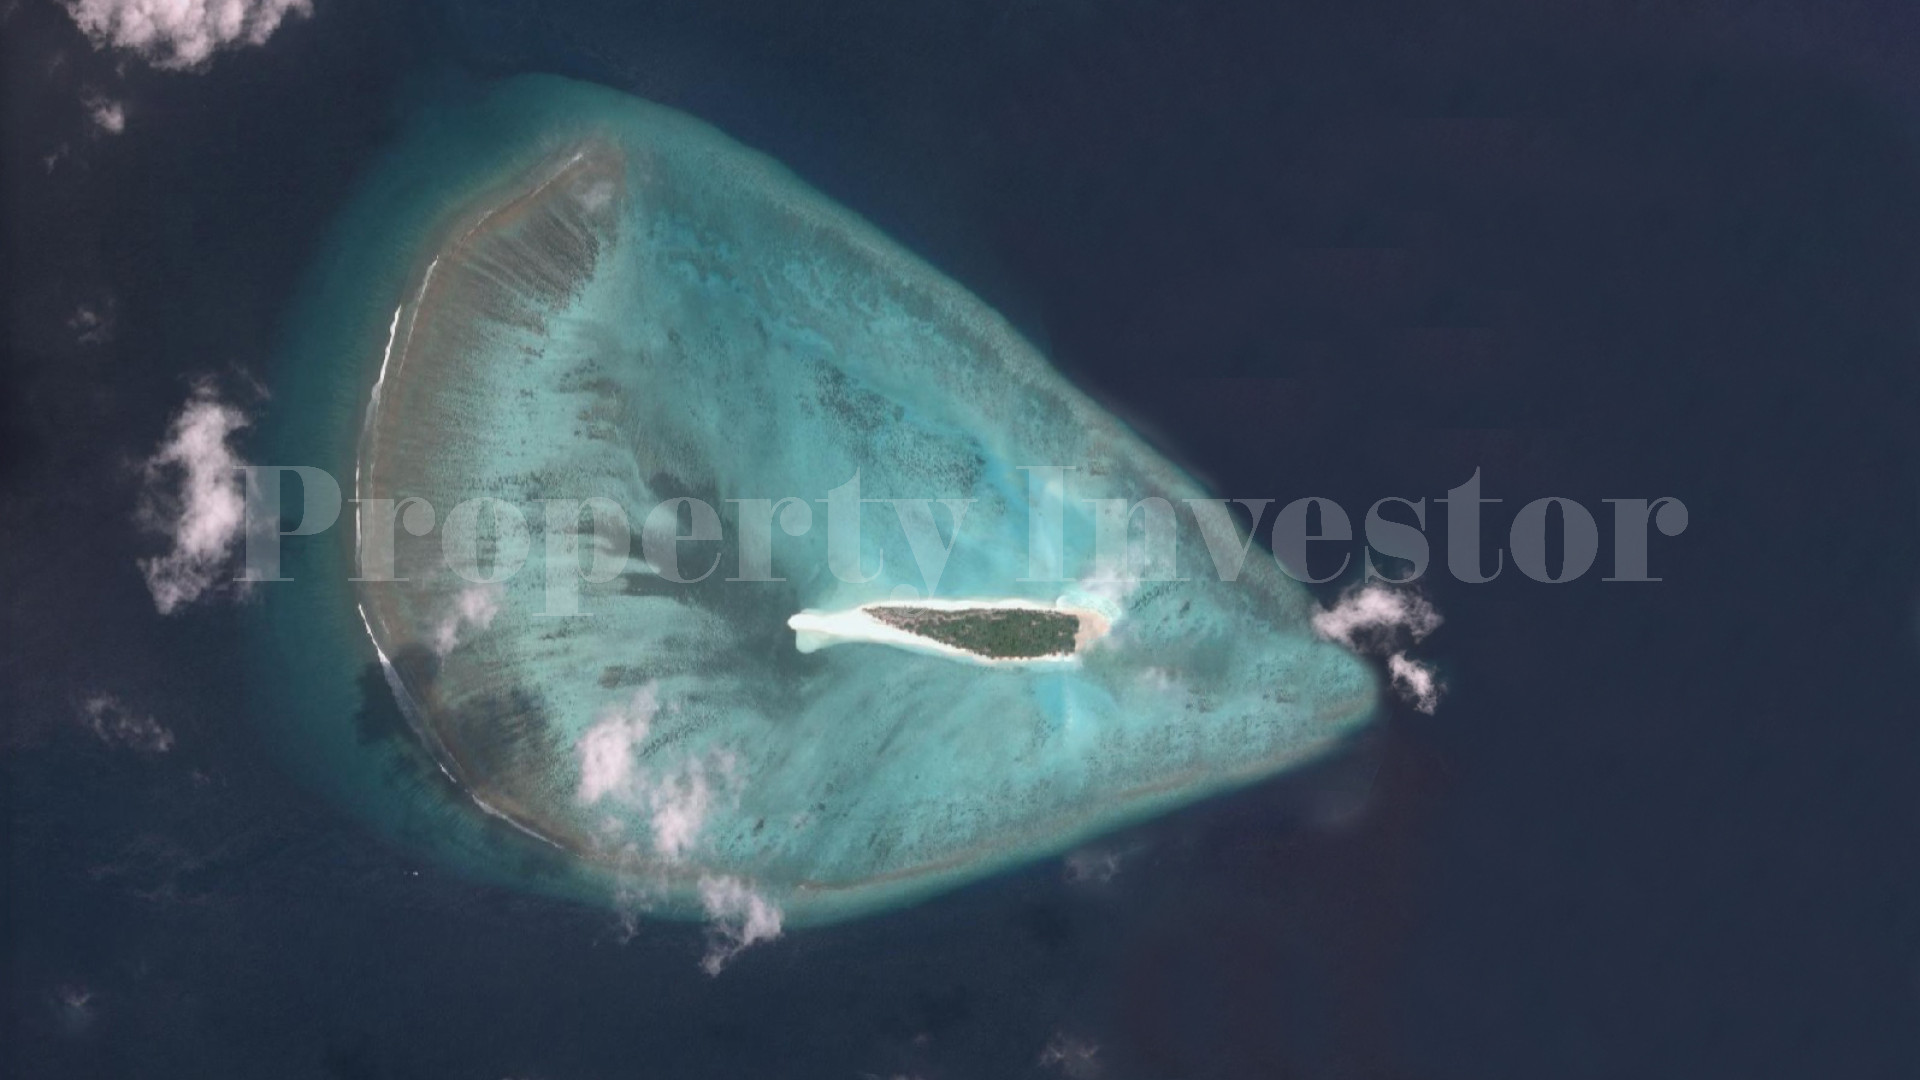 7.4 Hectare Private Virgin Island for Personal or Commercial Development for Sale in the Maldives